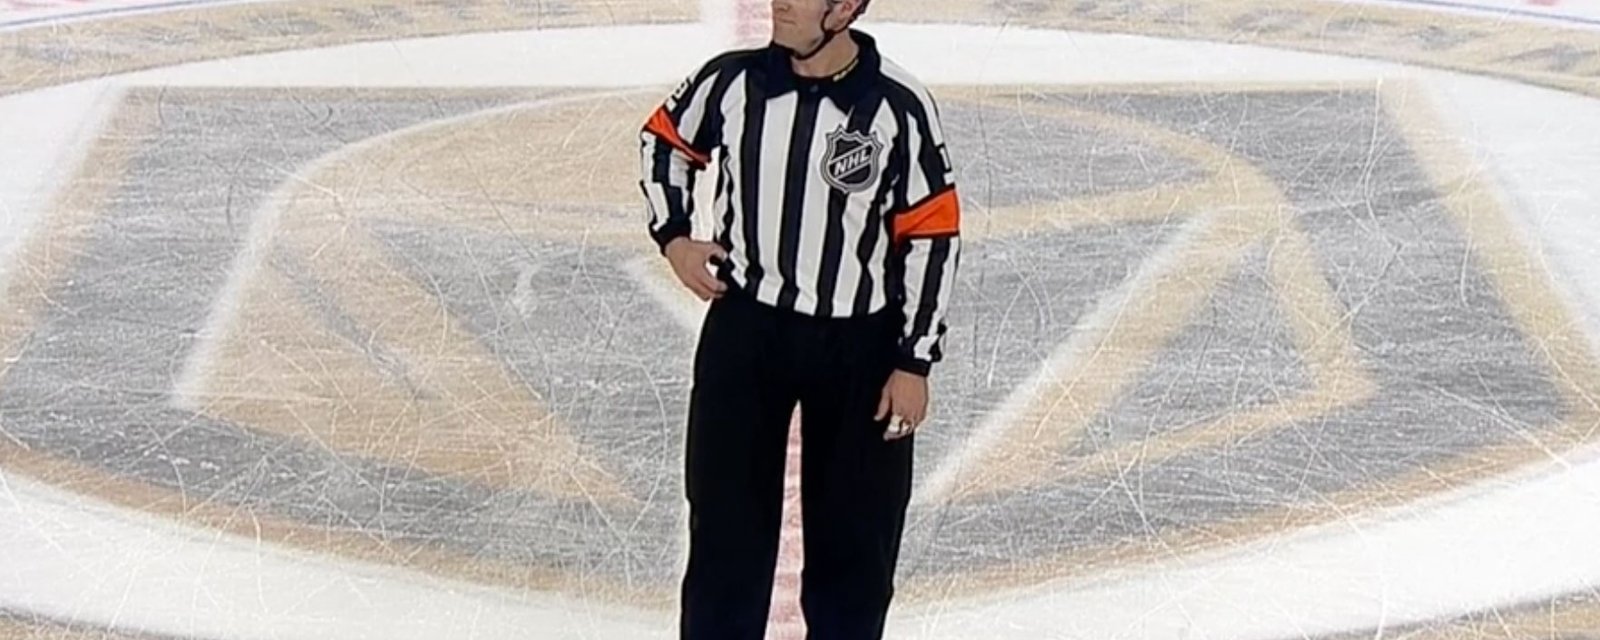 Referee Gord Dwyer is rudely interrupted while making a call during the CHI-VGK game